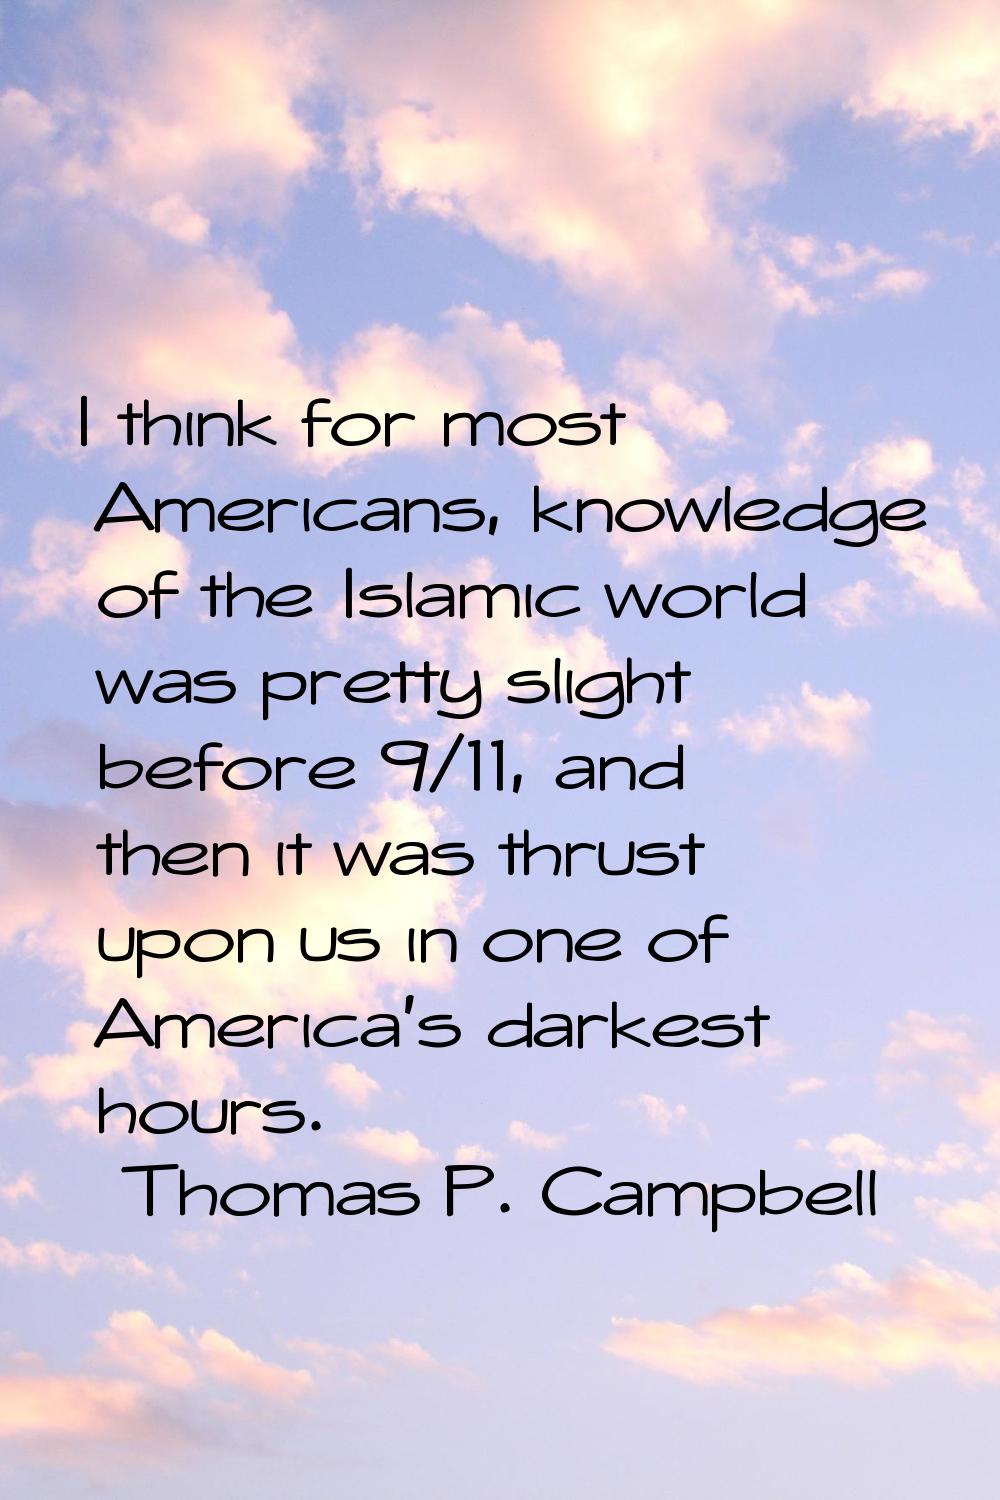 I think for most Americans, knowledge of the Islamic world was pretty slight before 9/11, and then 